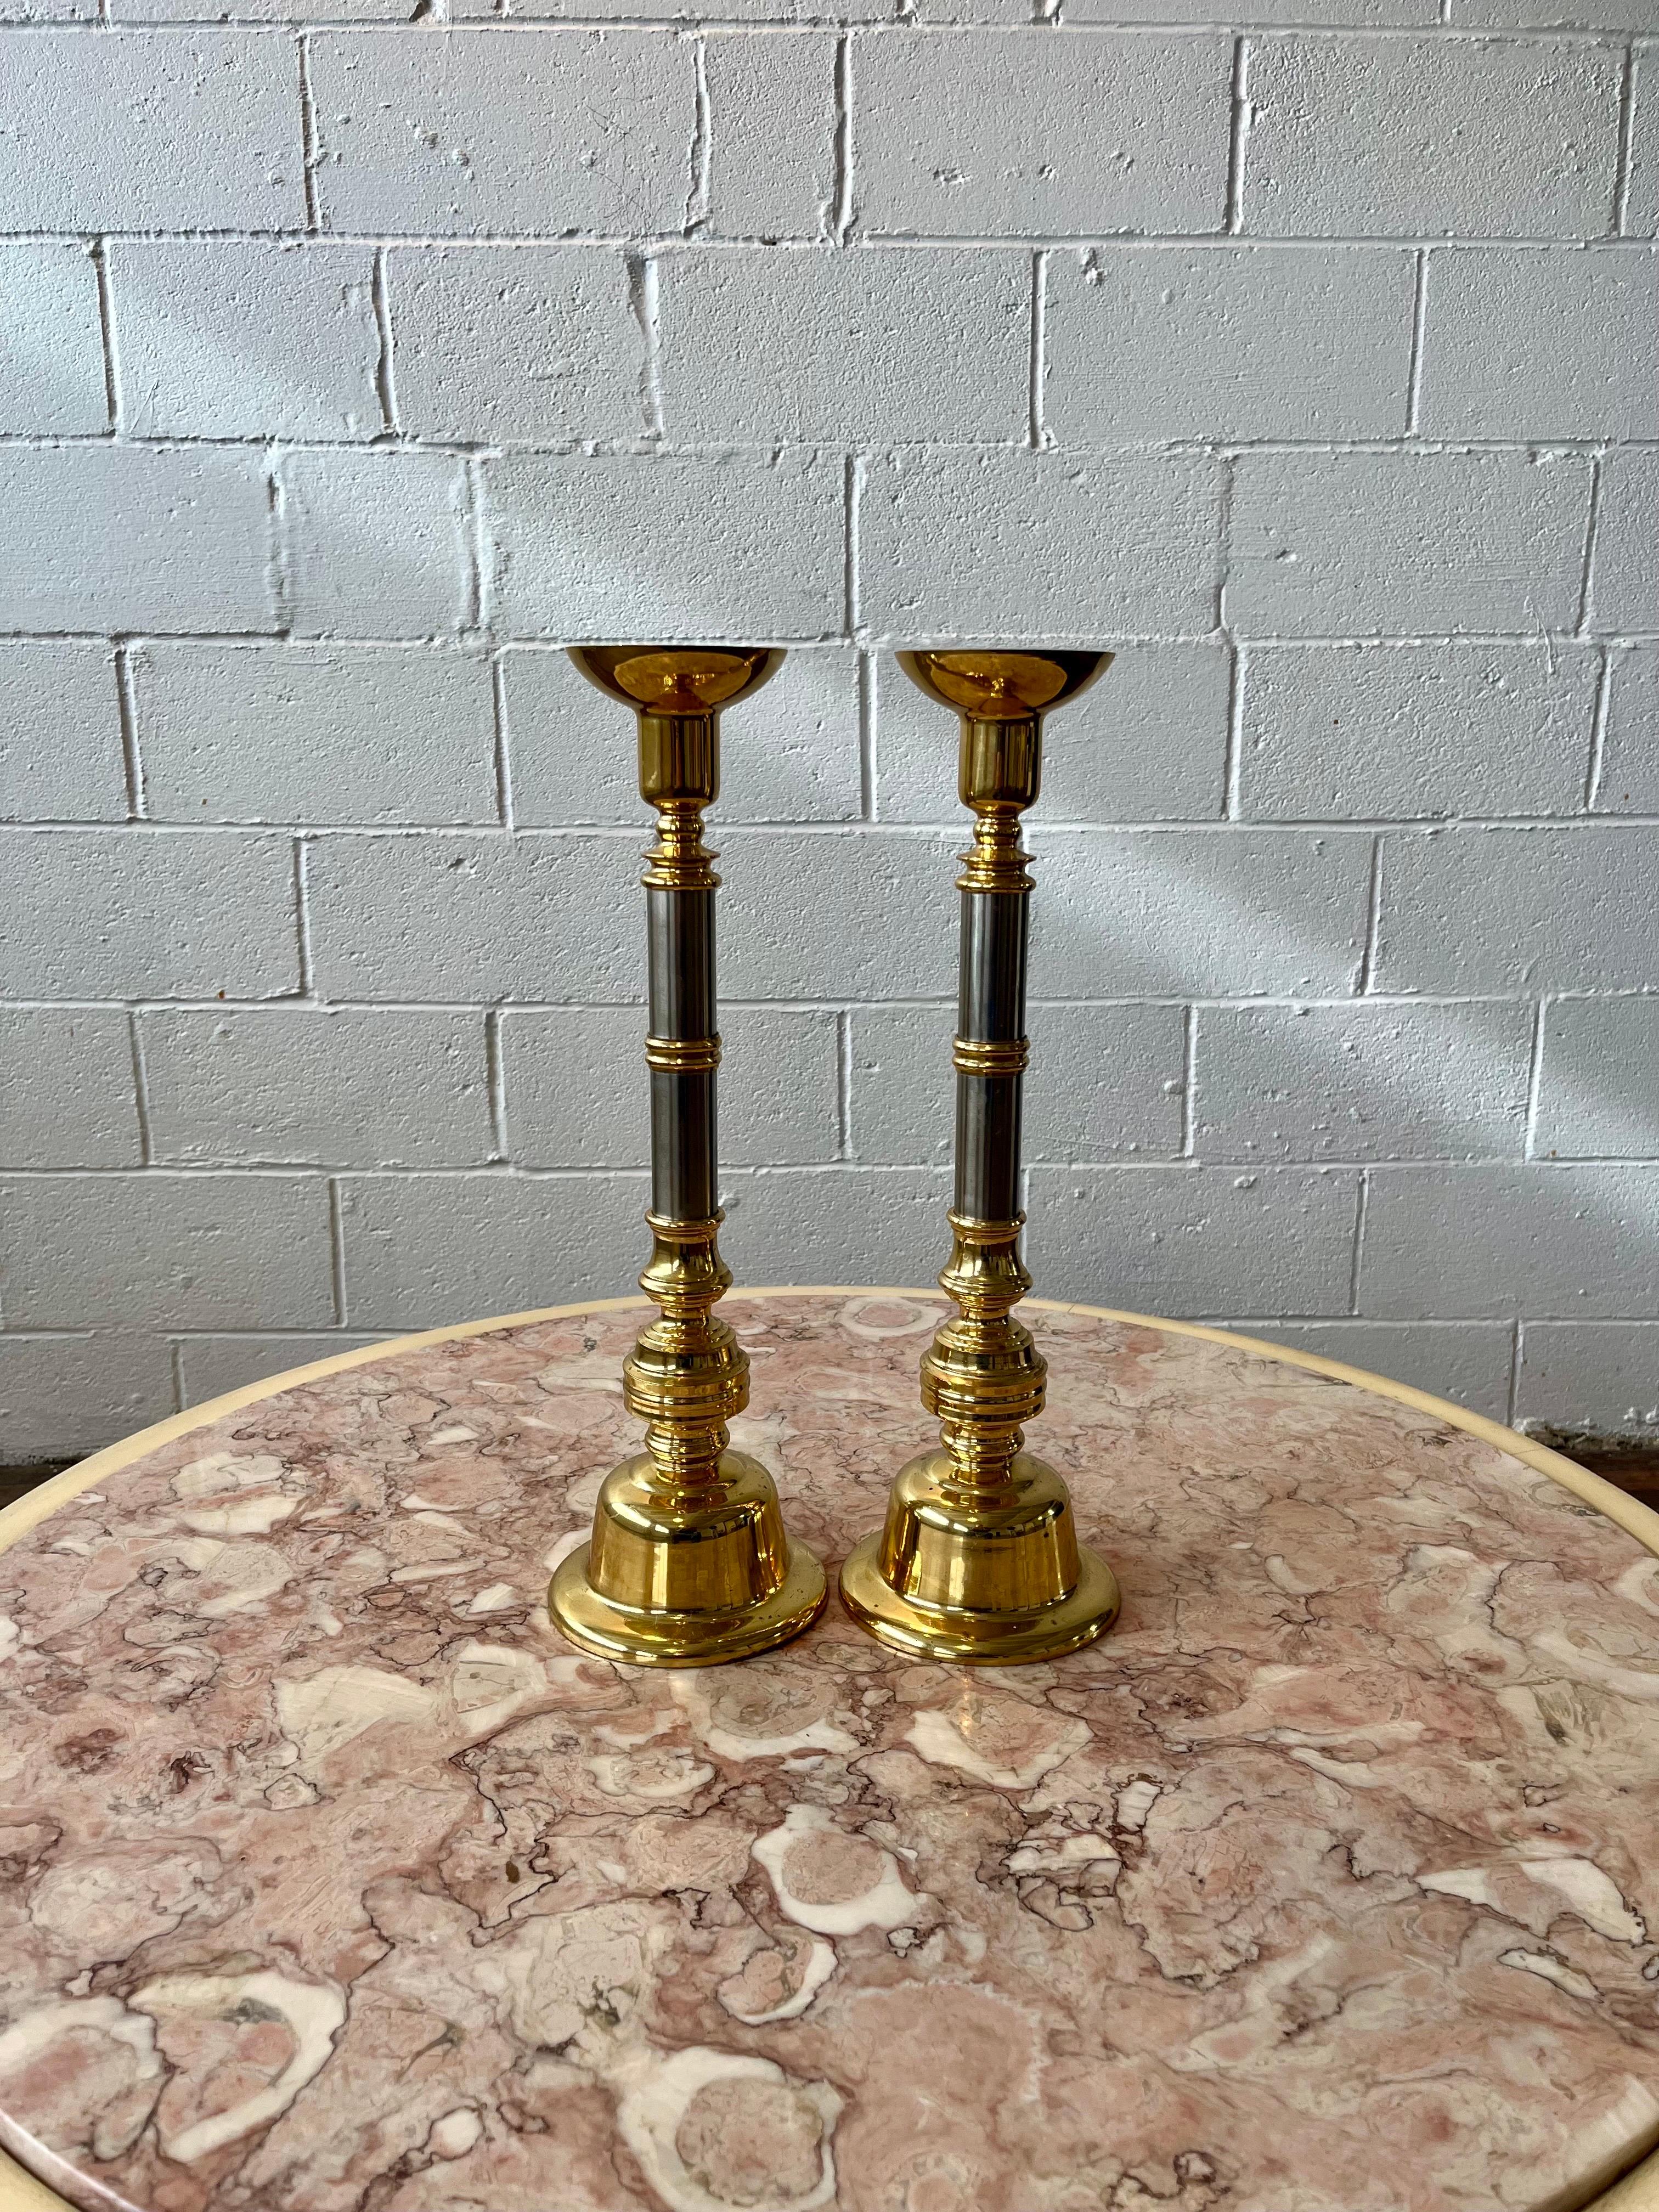 American 1970's Candle Holders Neoclassical Brass and Chrome Candle Sticks - a Pair For Sale